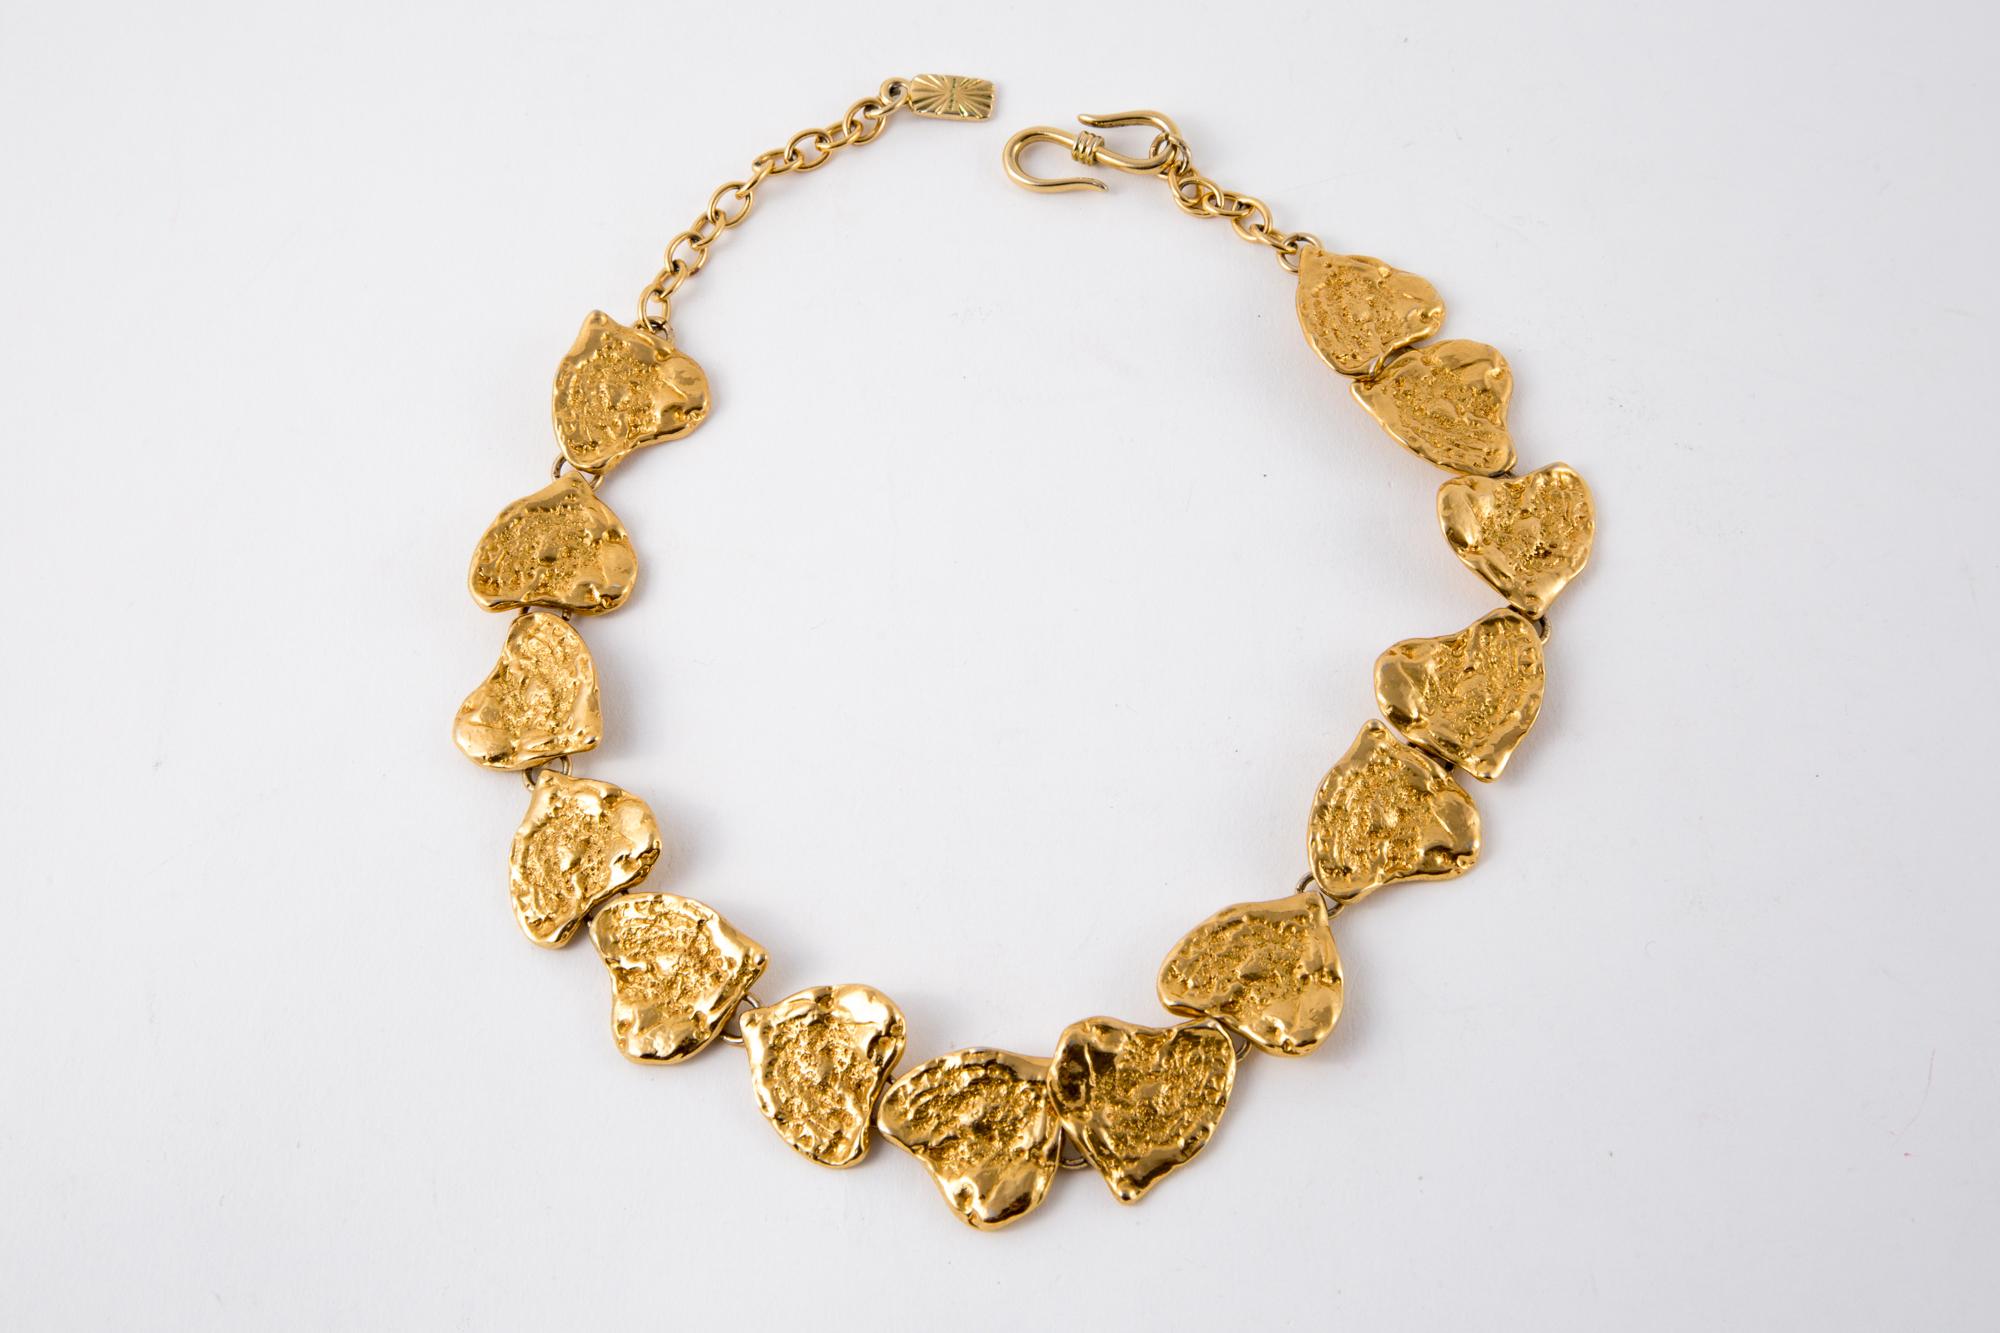  1980s Yves Saint Laurent gold-tone hearts necklace featuring textured irregular hearts, an adjustable chain, a hook closure, a back YSL pitted plaque.
Designed by Goossens.
 Maxi length: 20.4in. (52 cm)
Heart YSL Width 1in (2.5cm)
In excellent